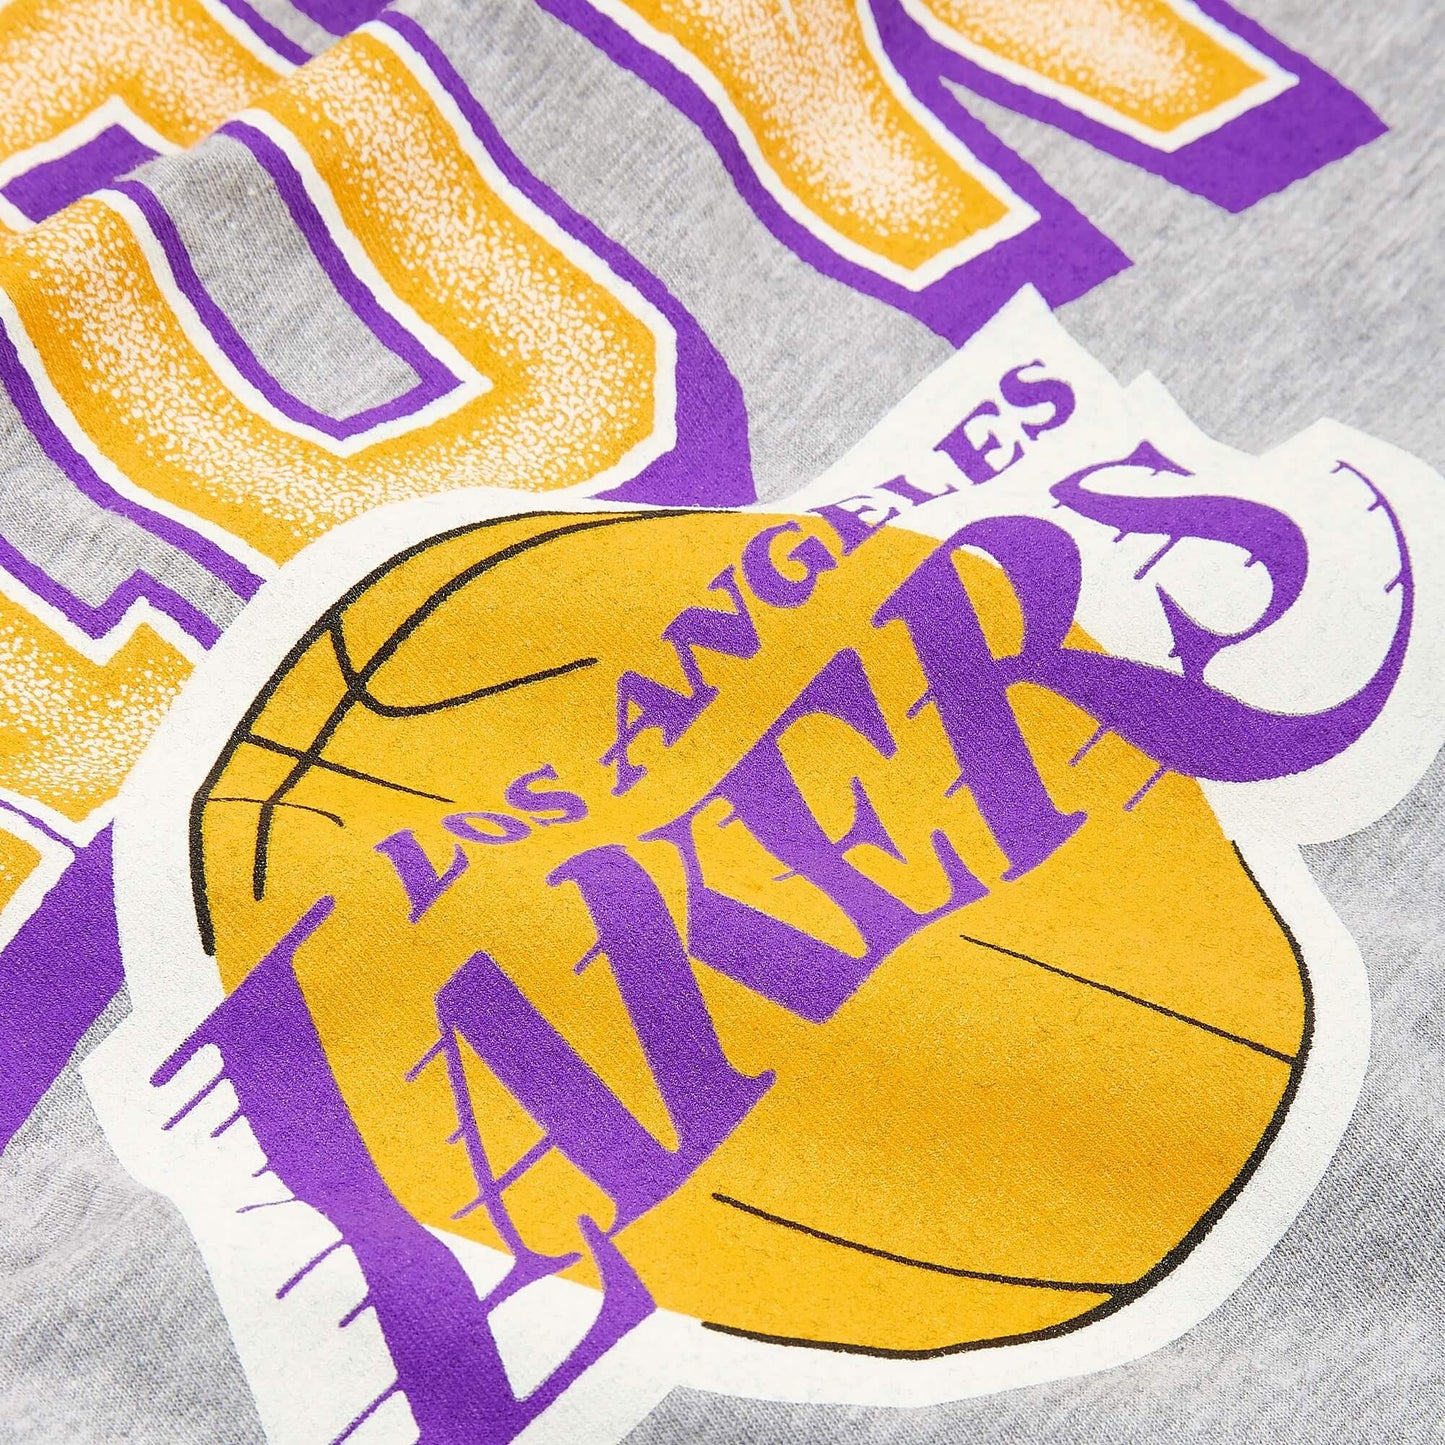 Mitchell & Ness NBA Lake Show Lakers Tee LOS ANGELES LAKERS GREY